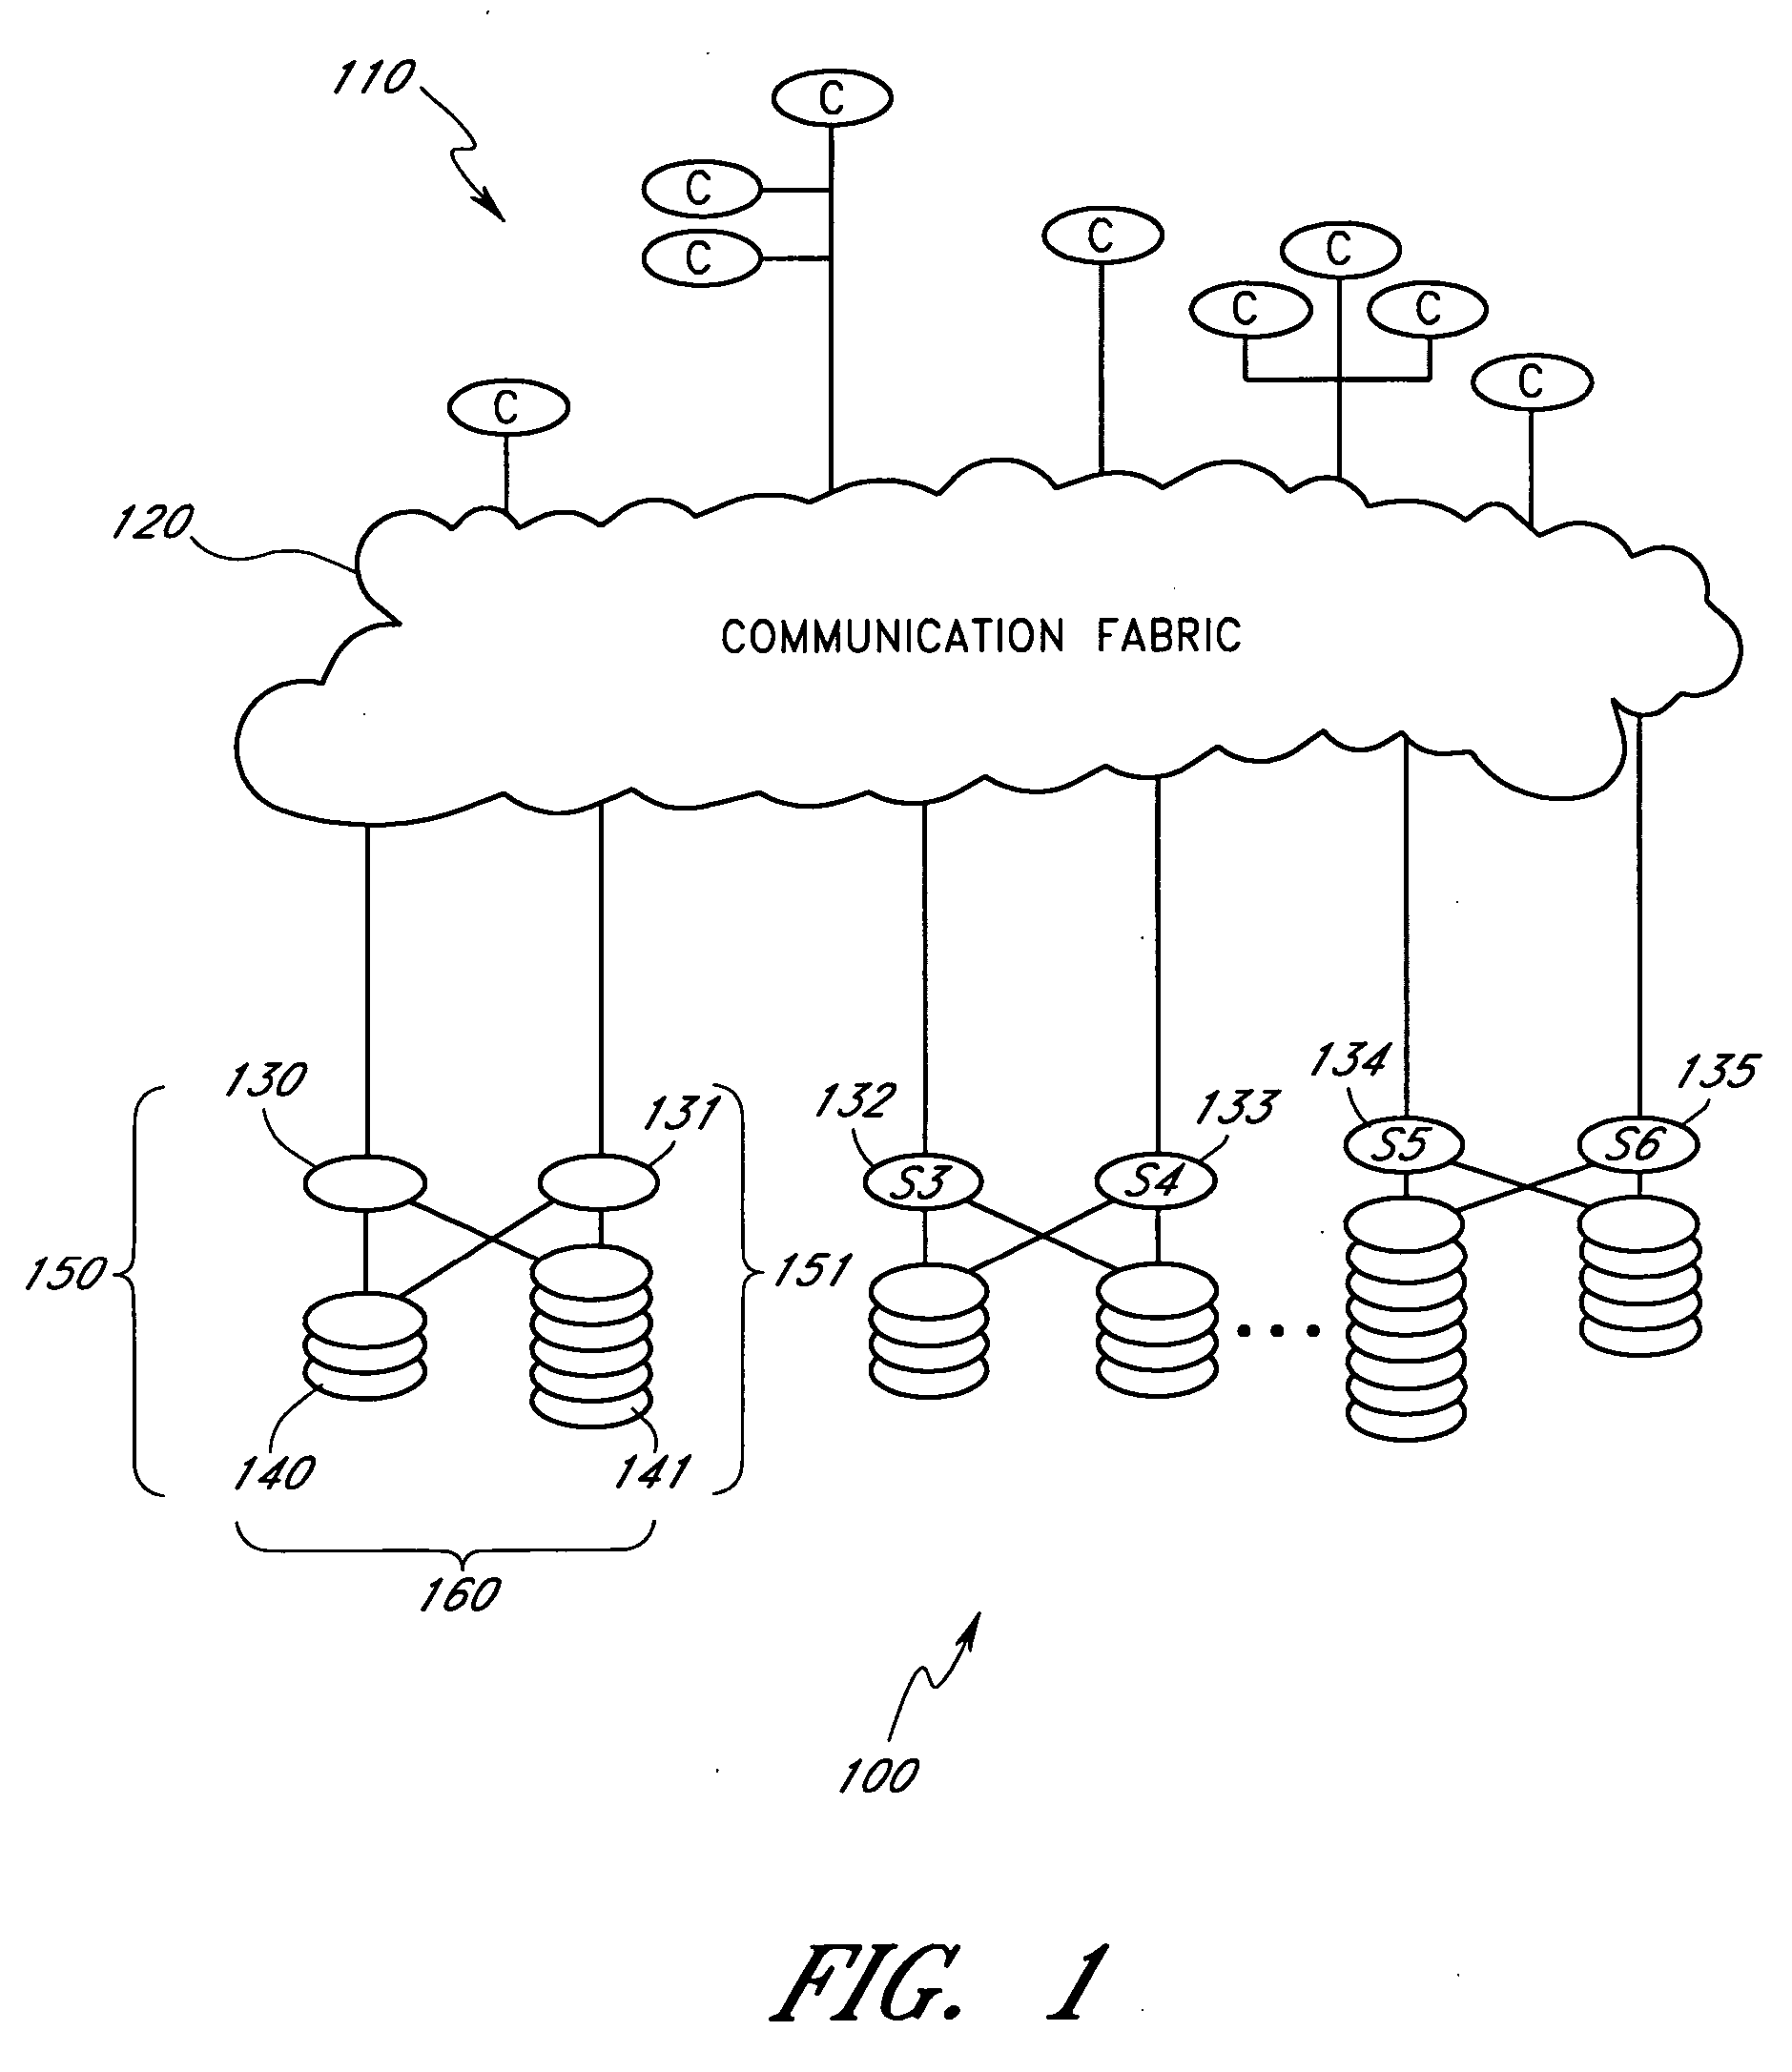 Systems and methods for load balancing drives and servers